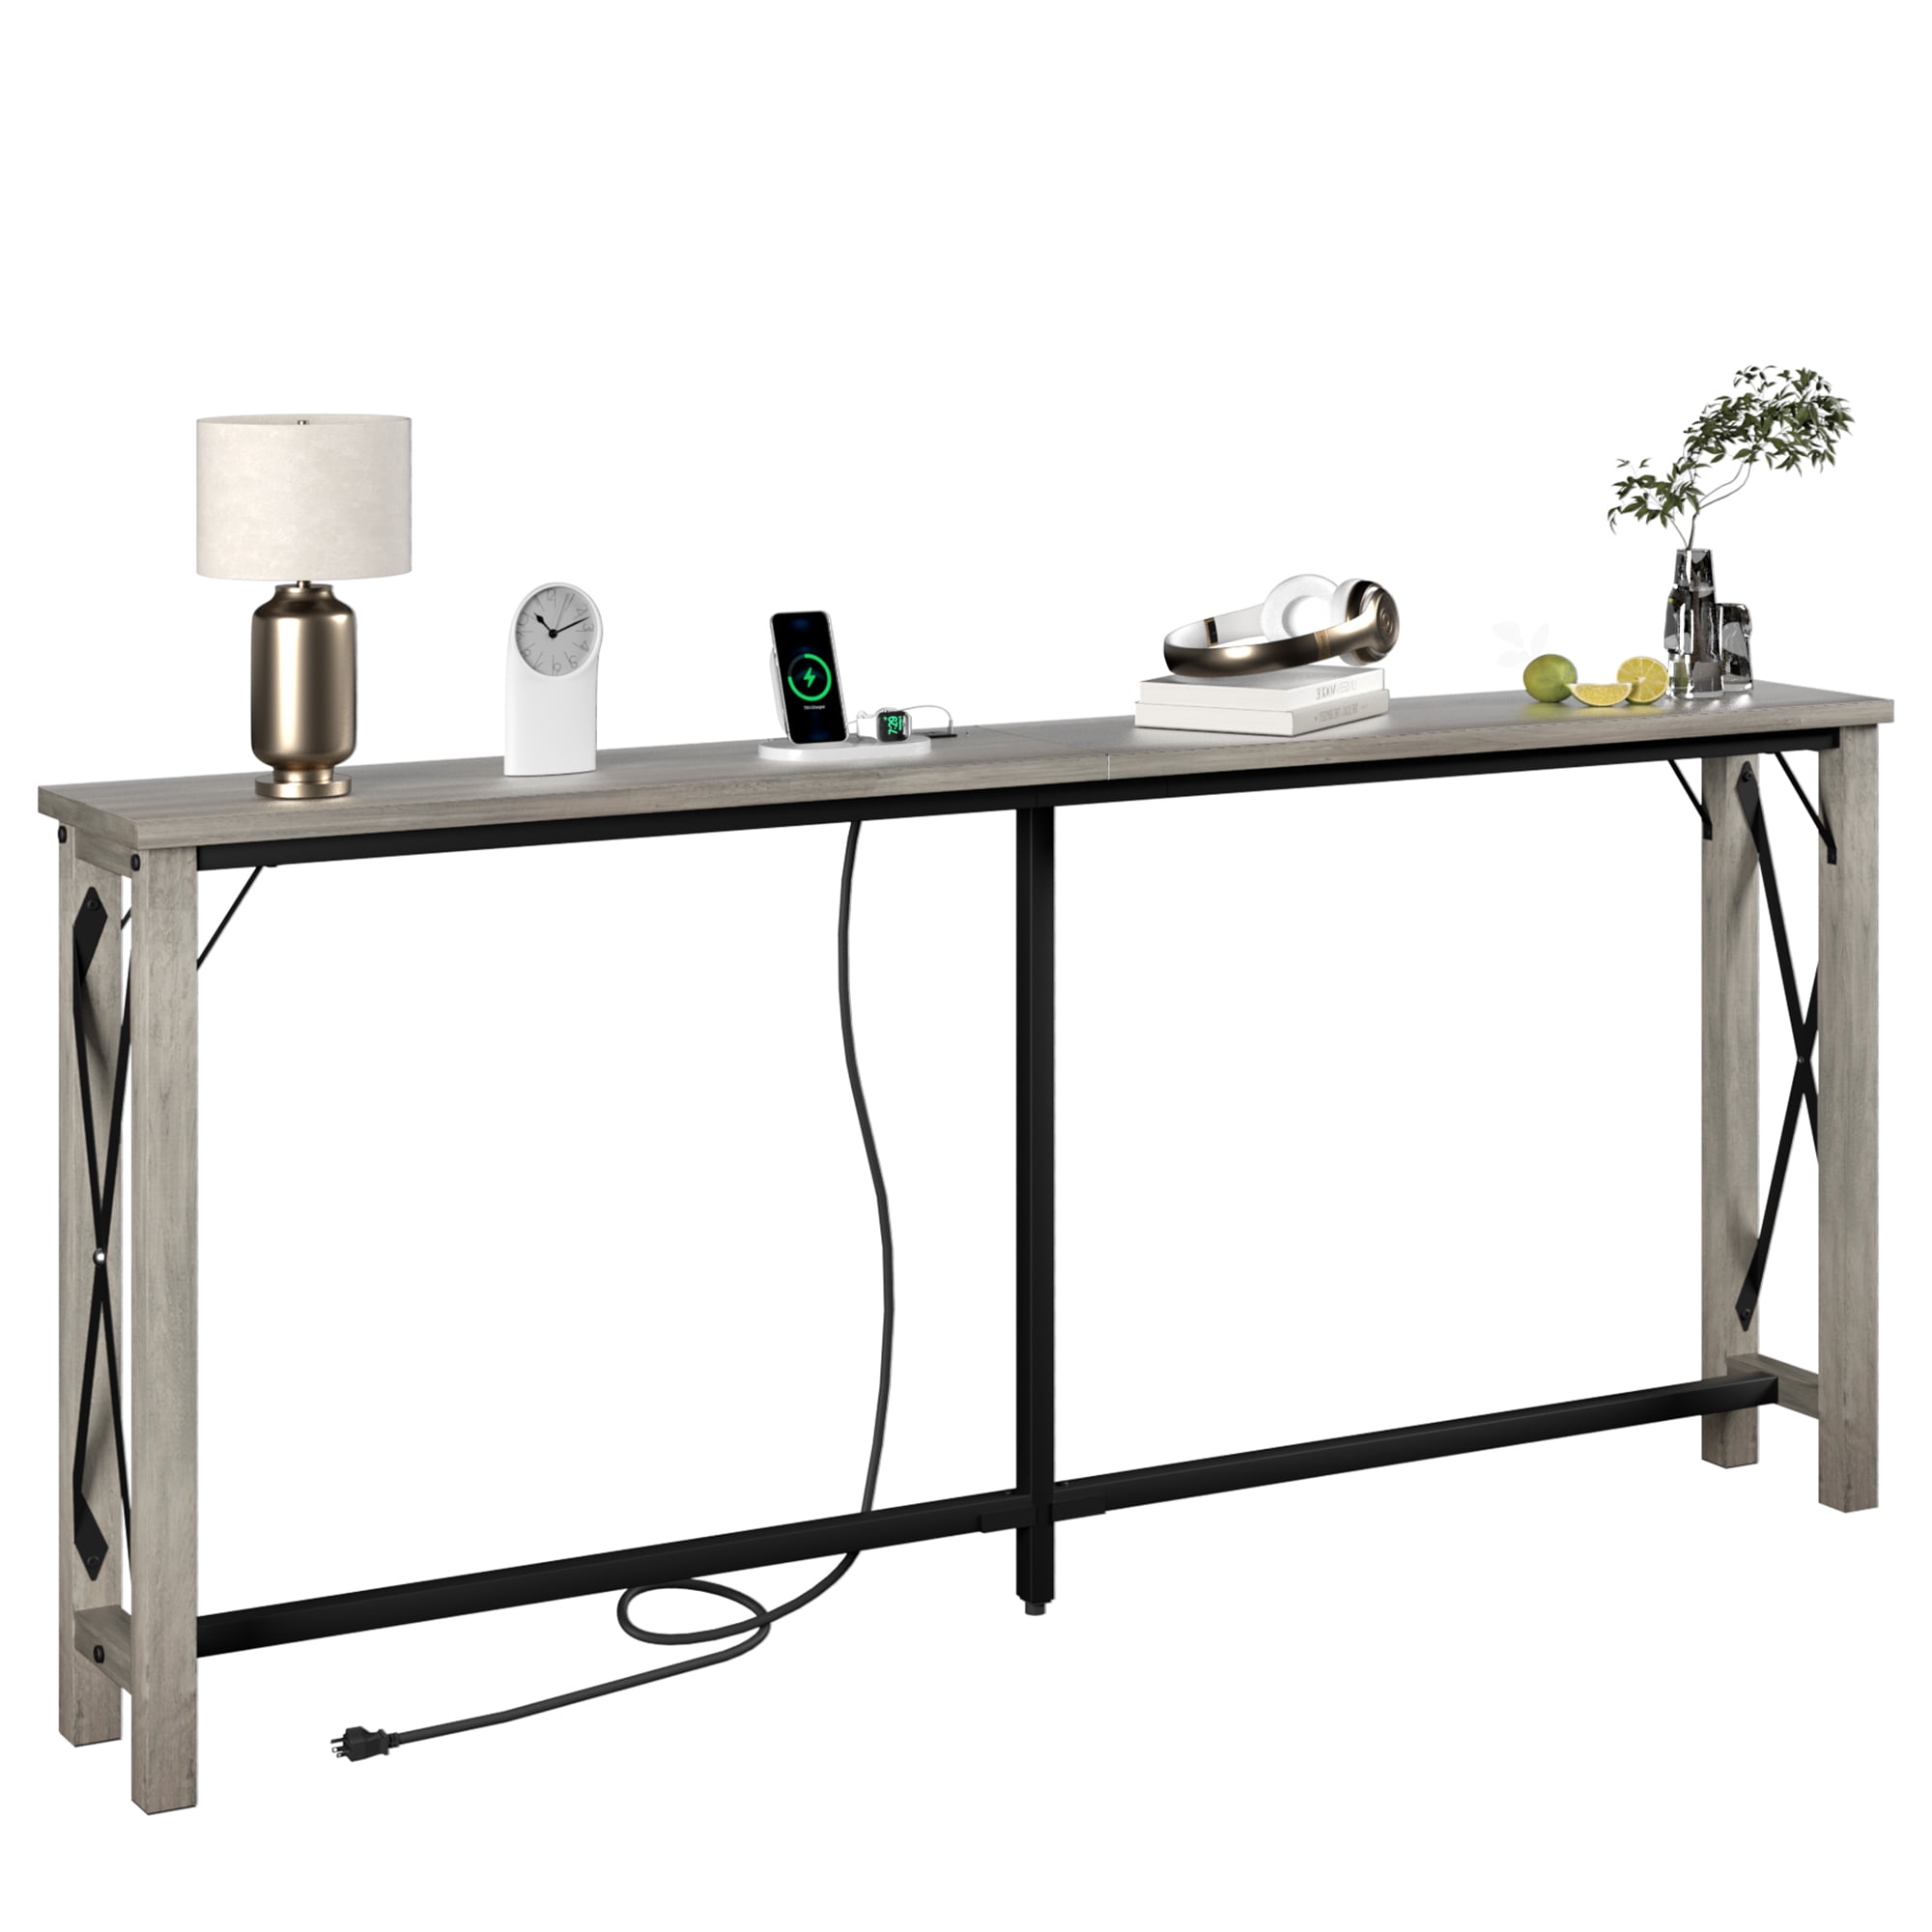 WhizMax Narrow Console Table, 70.8 Inch Sofa Table with Adjustable